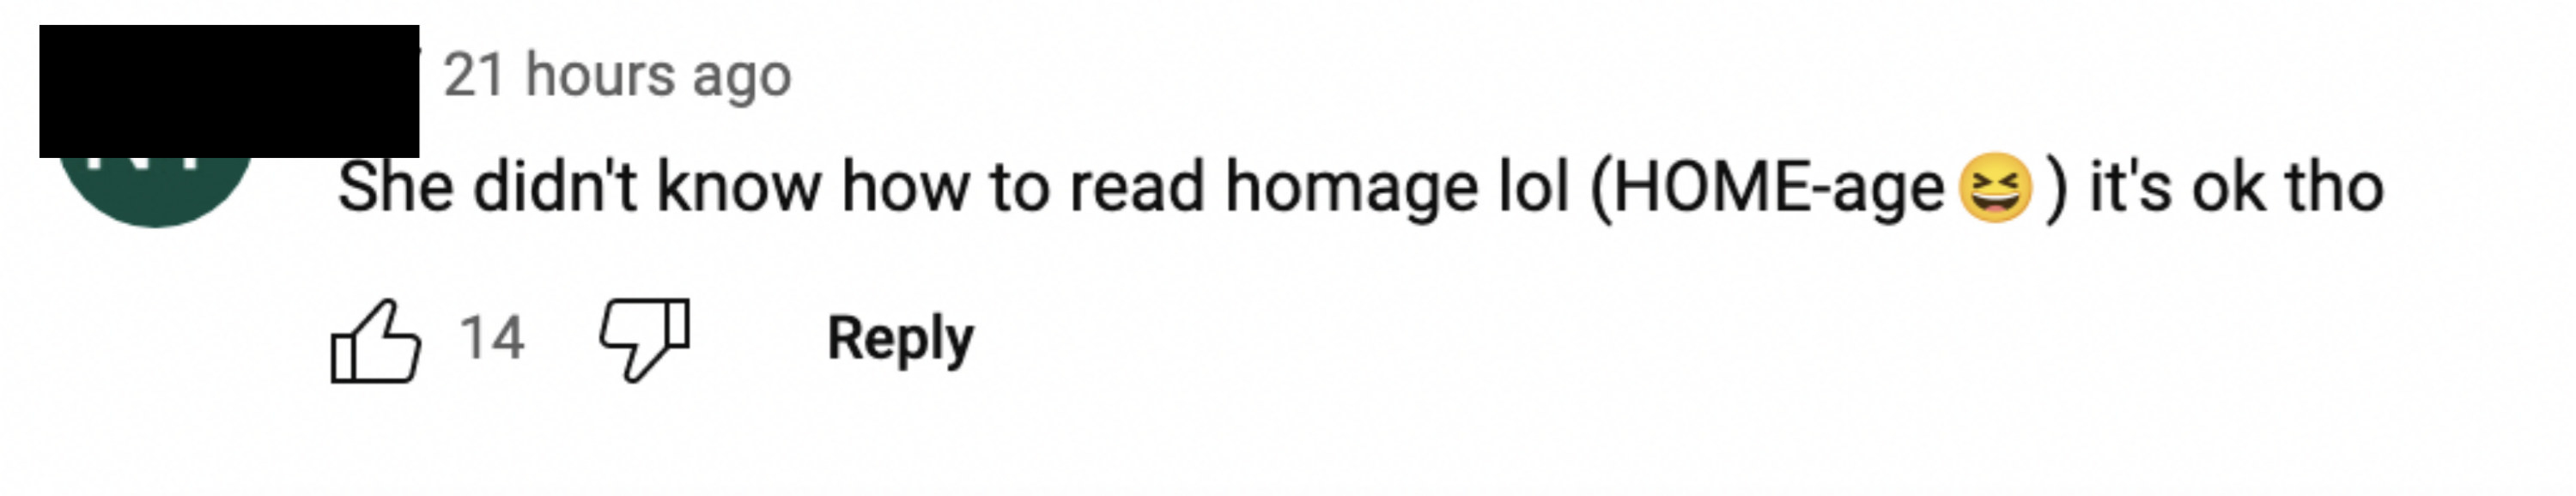 One person commented &quot;She didn&#x27;t know to read homage lol (Home-age&quot; it&#x27;s ok tho